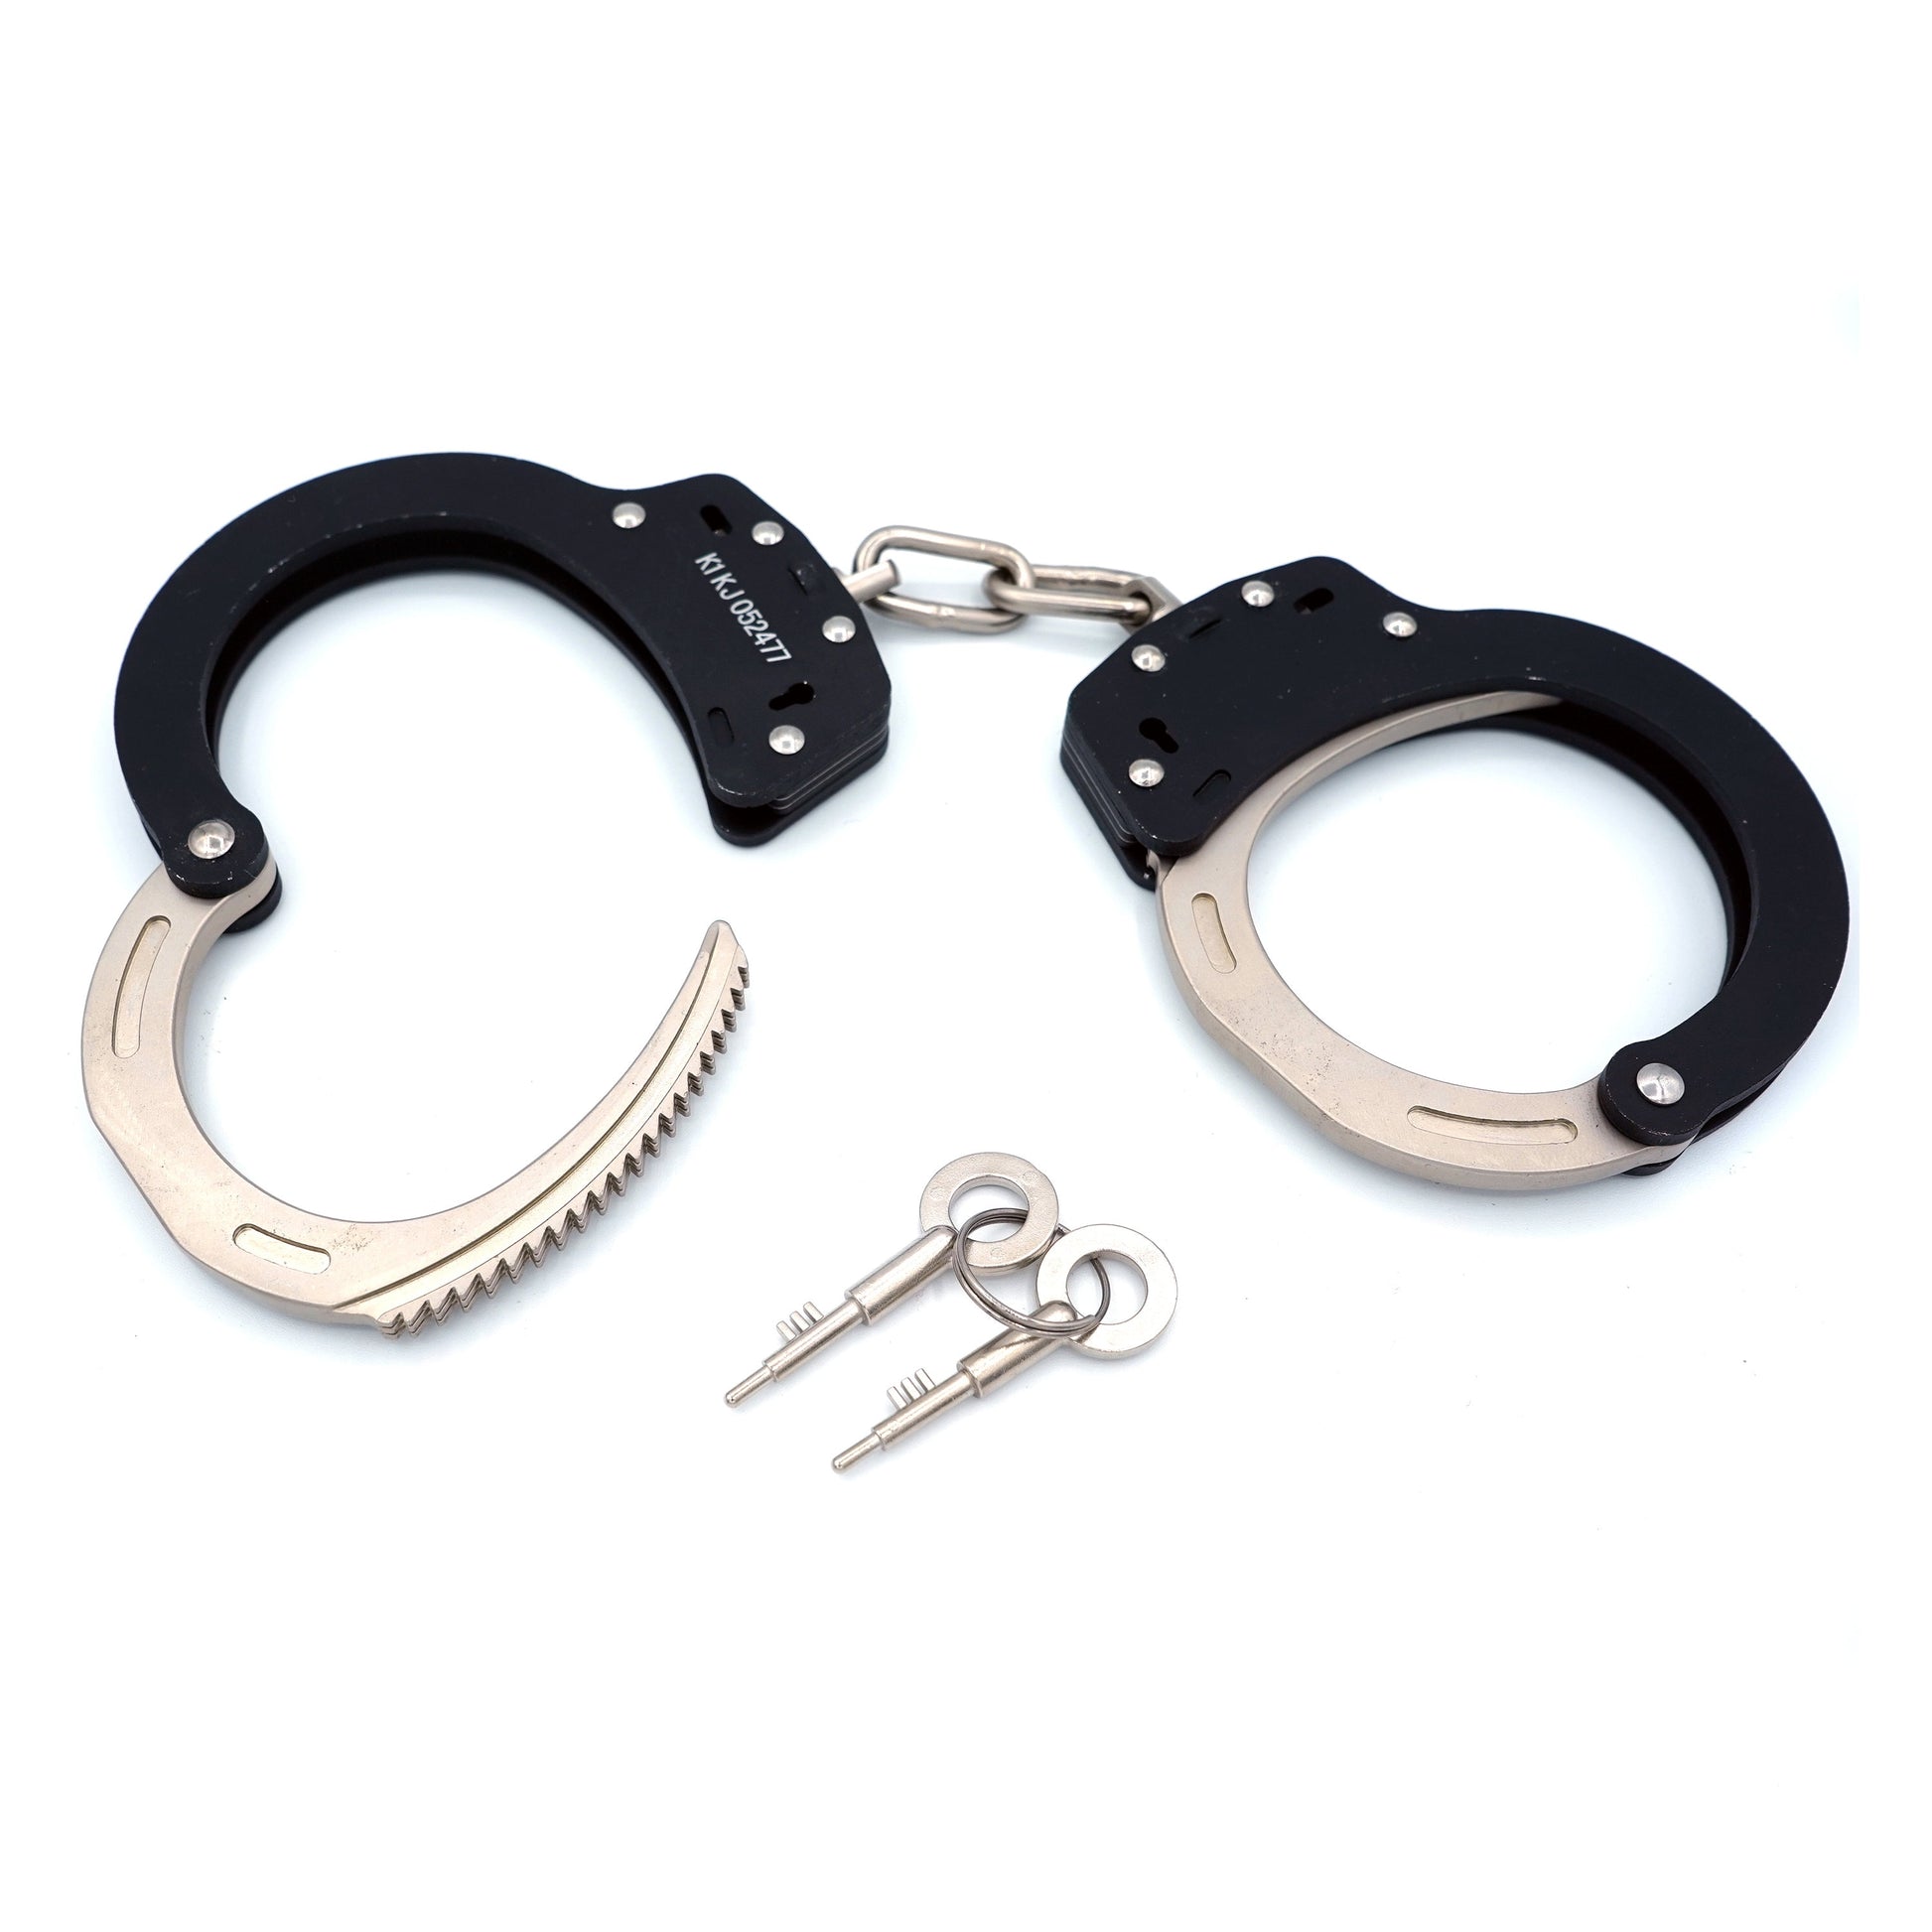 Coloured Metal Handcuffs out of Aluminium Alloy